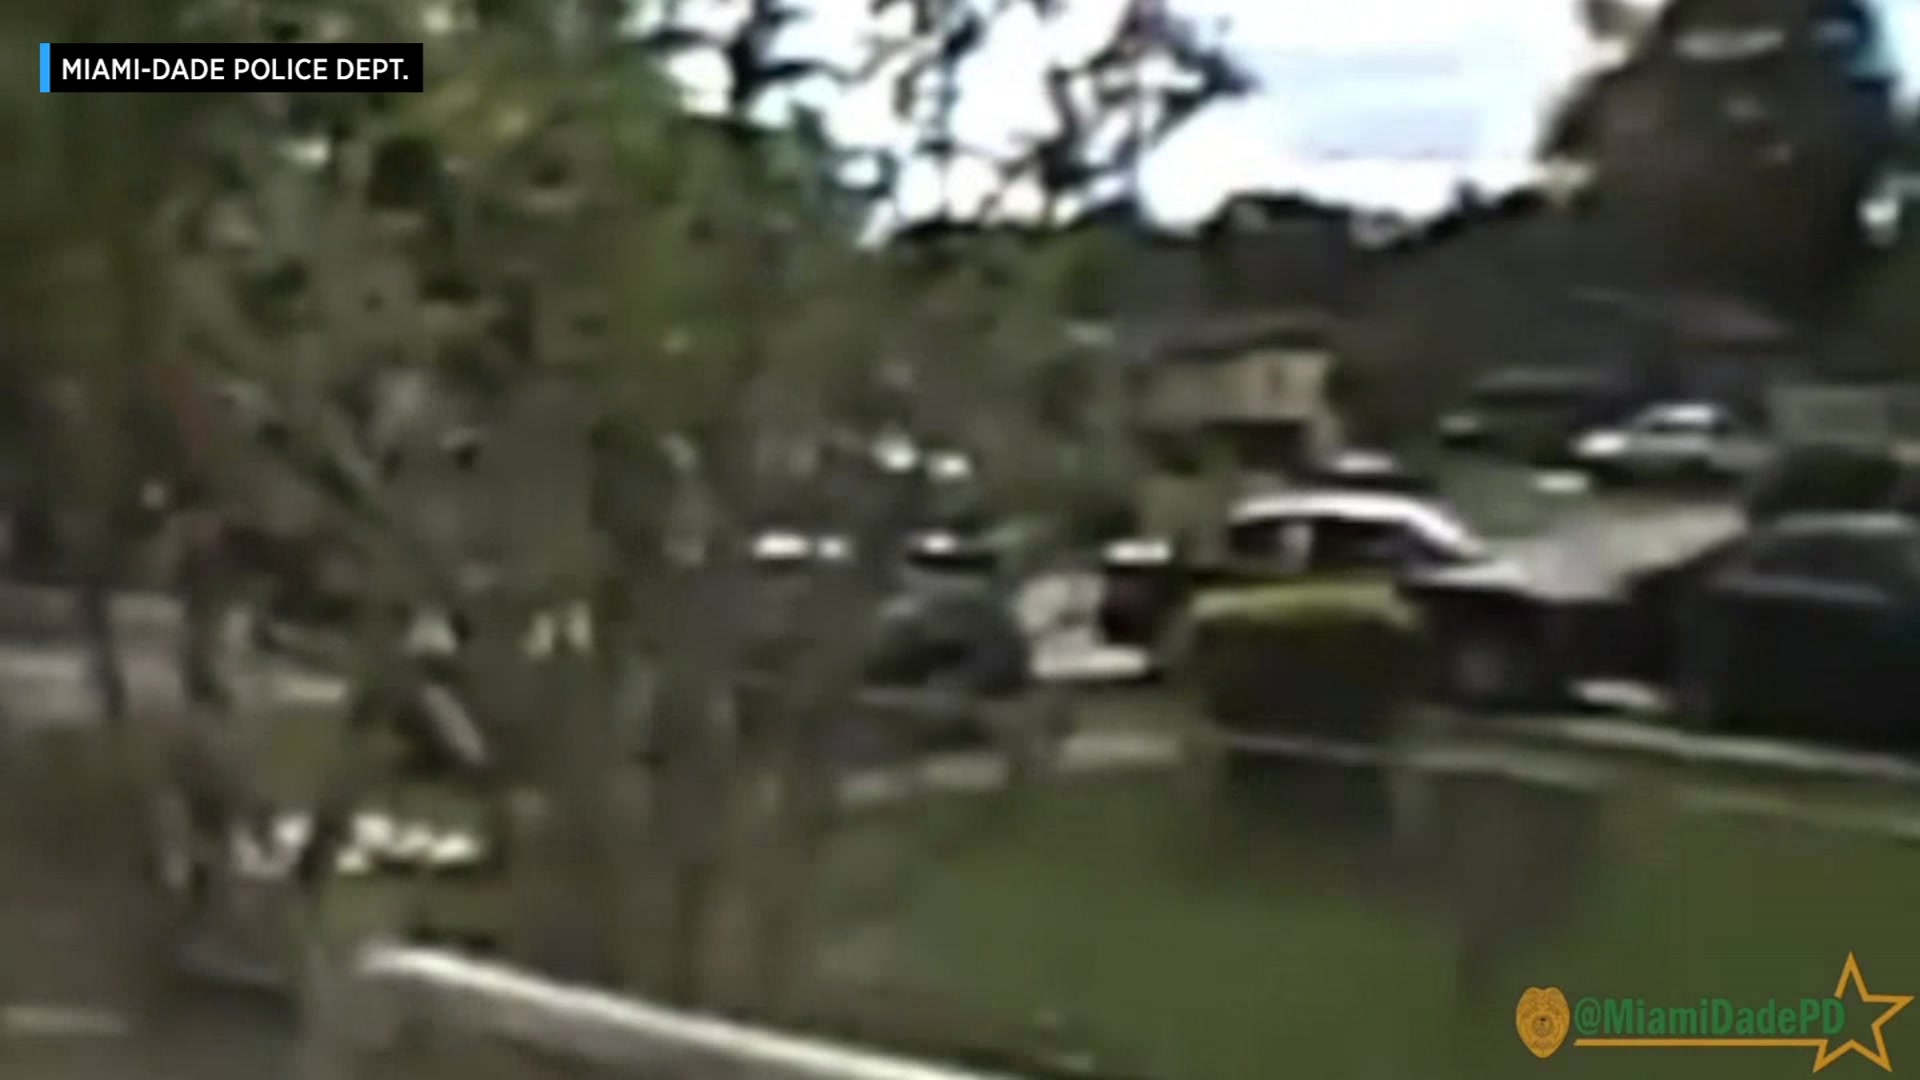 Caught On Video: Police Search For Clues In Fatal Drive-By Shooting In Florida City